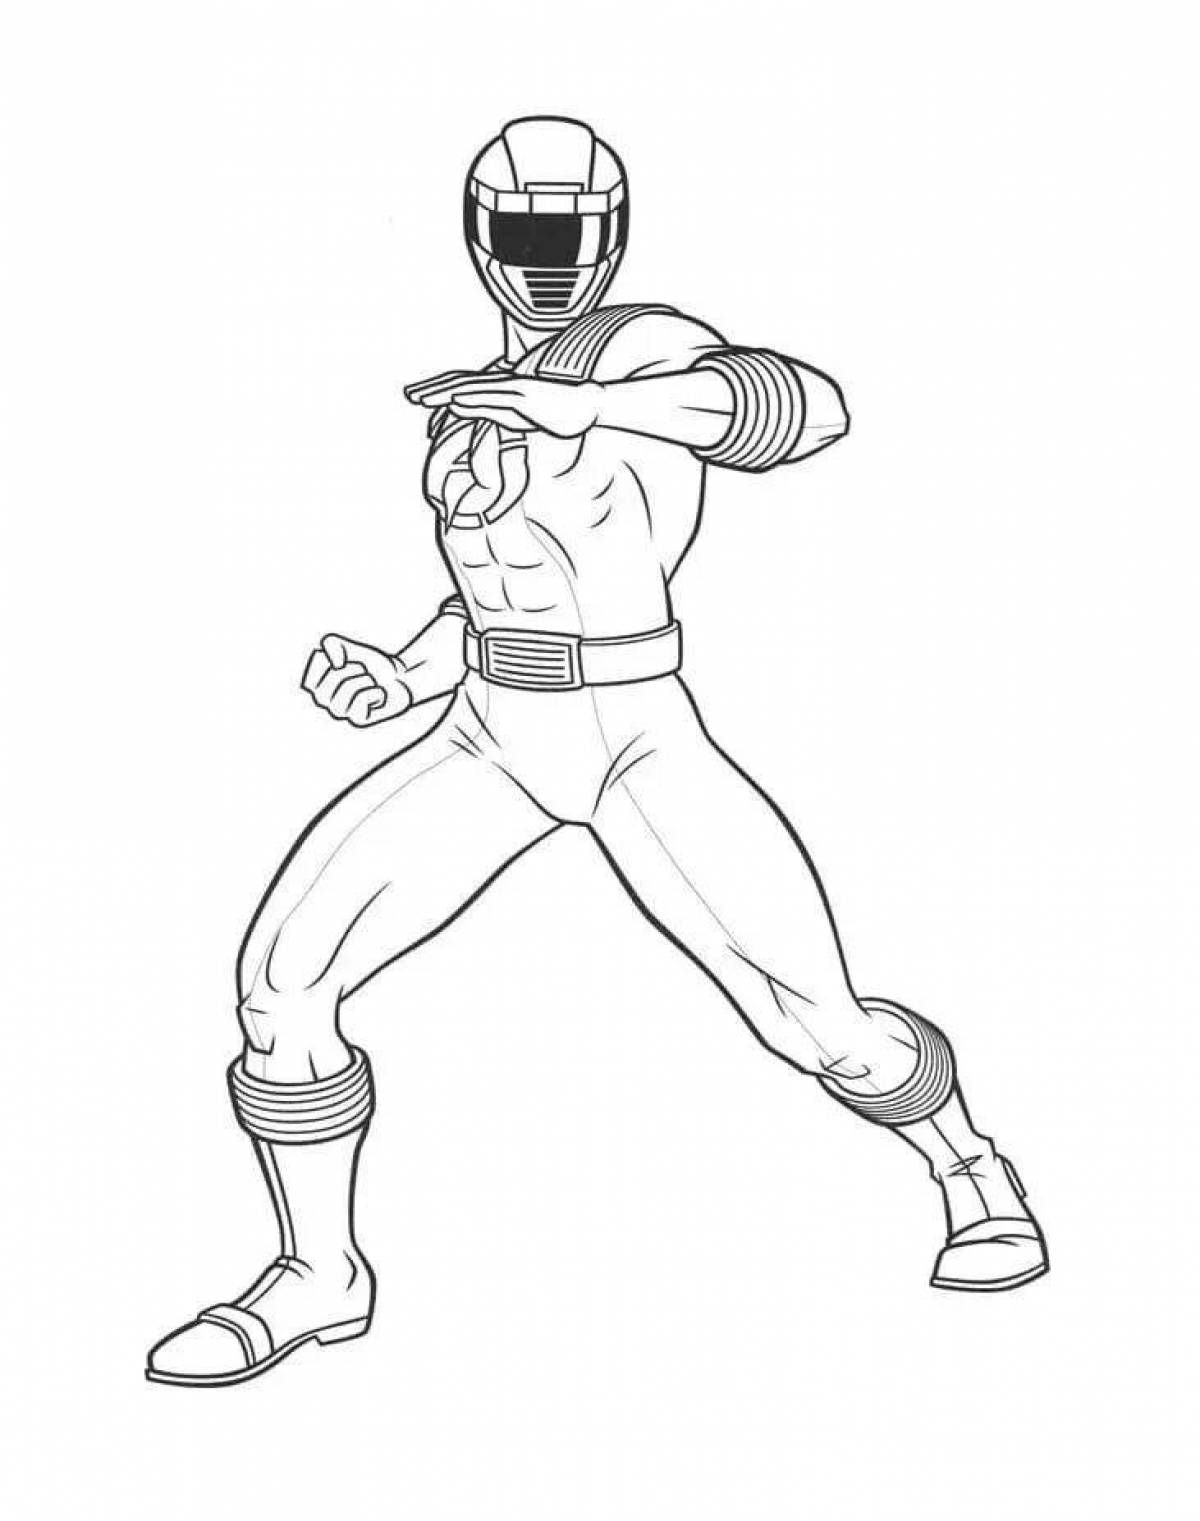 Dazzling Power Rangers coloring page